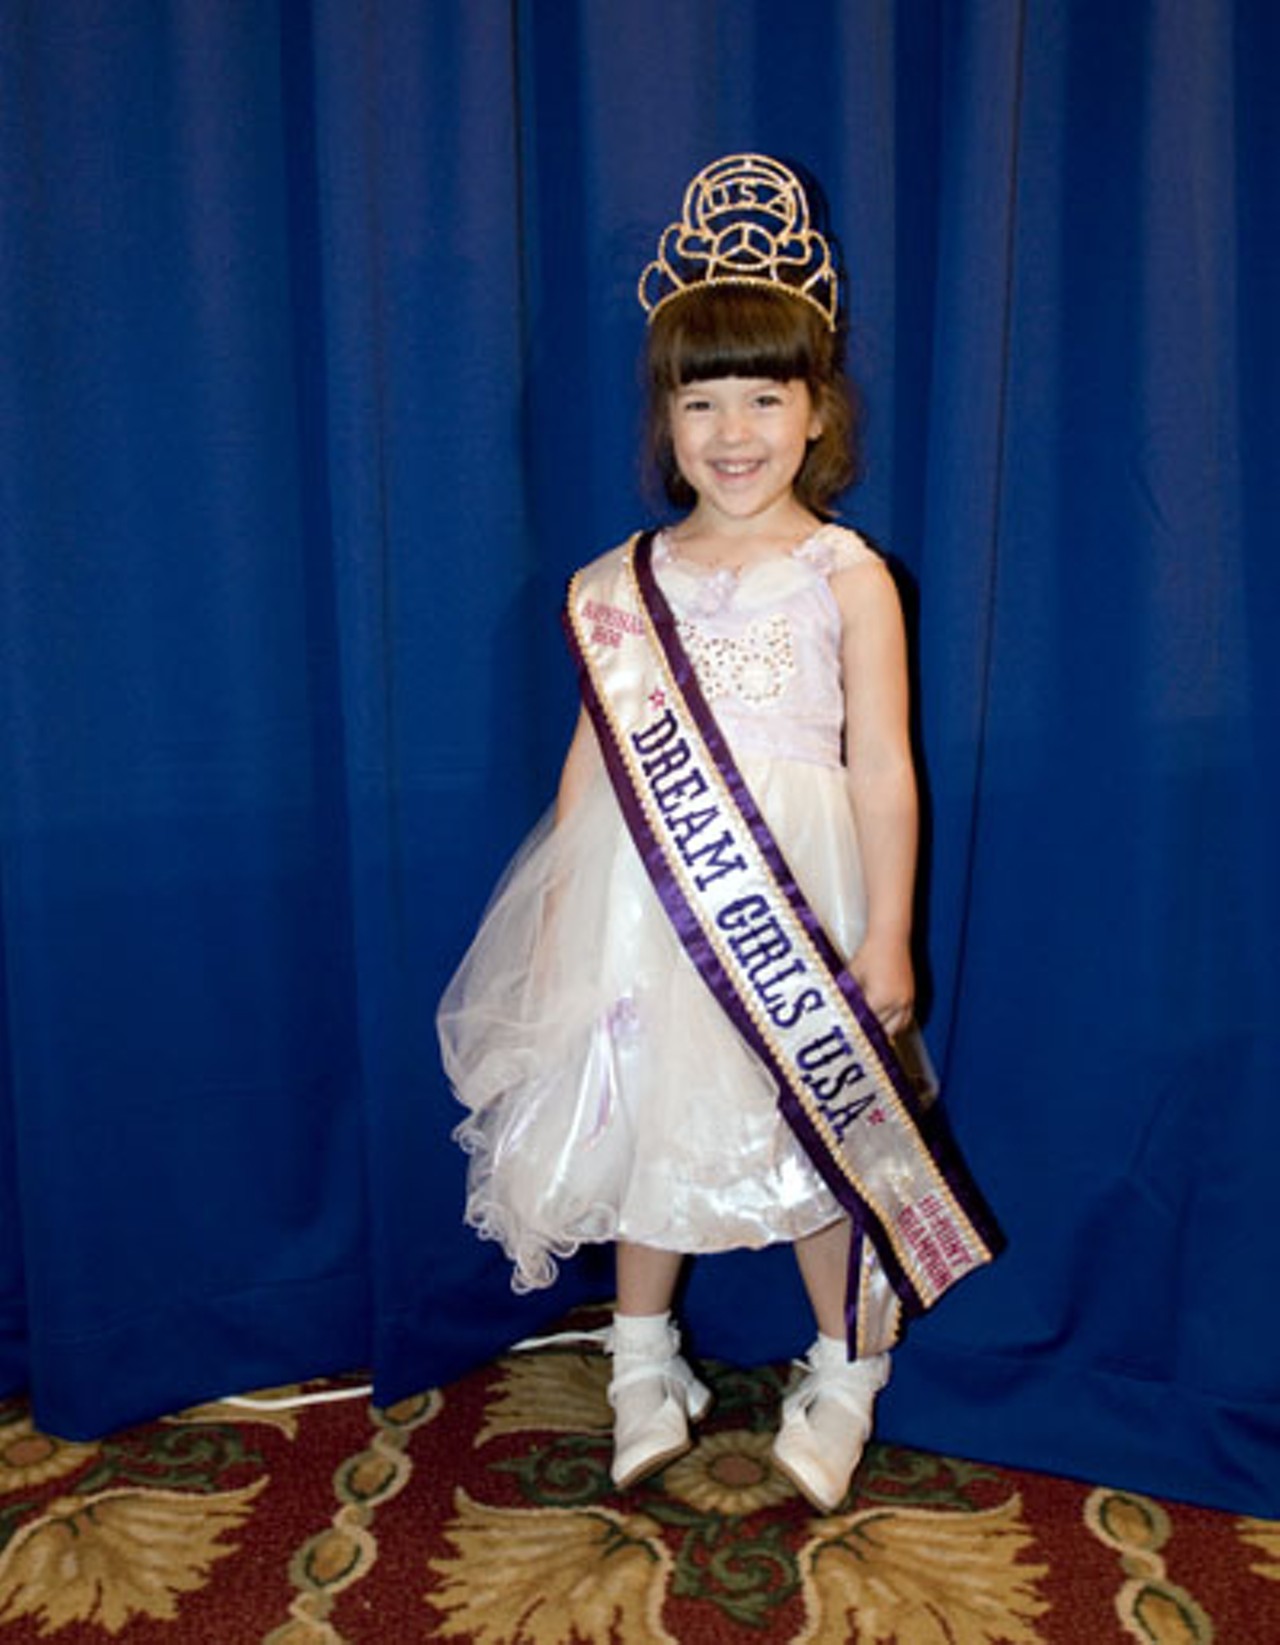 Samantha Hueschen from Wisconsin was this year's Baby/Tiny Miss High Point Champion.